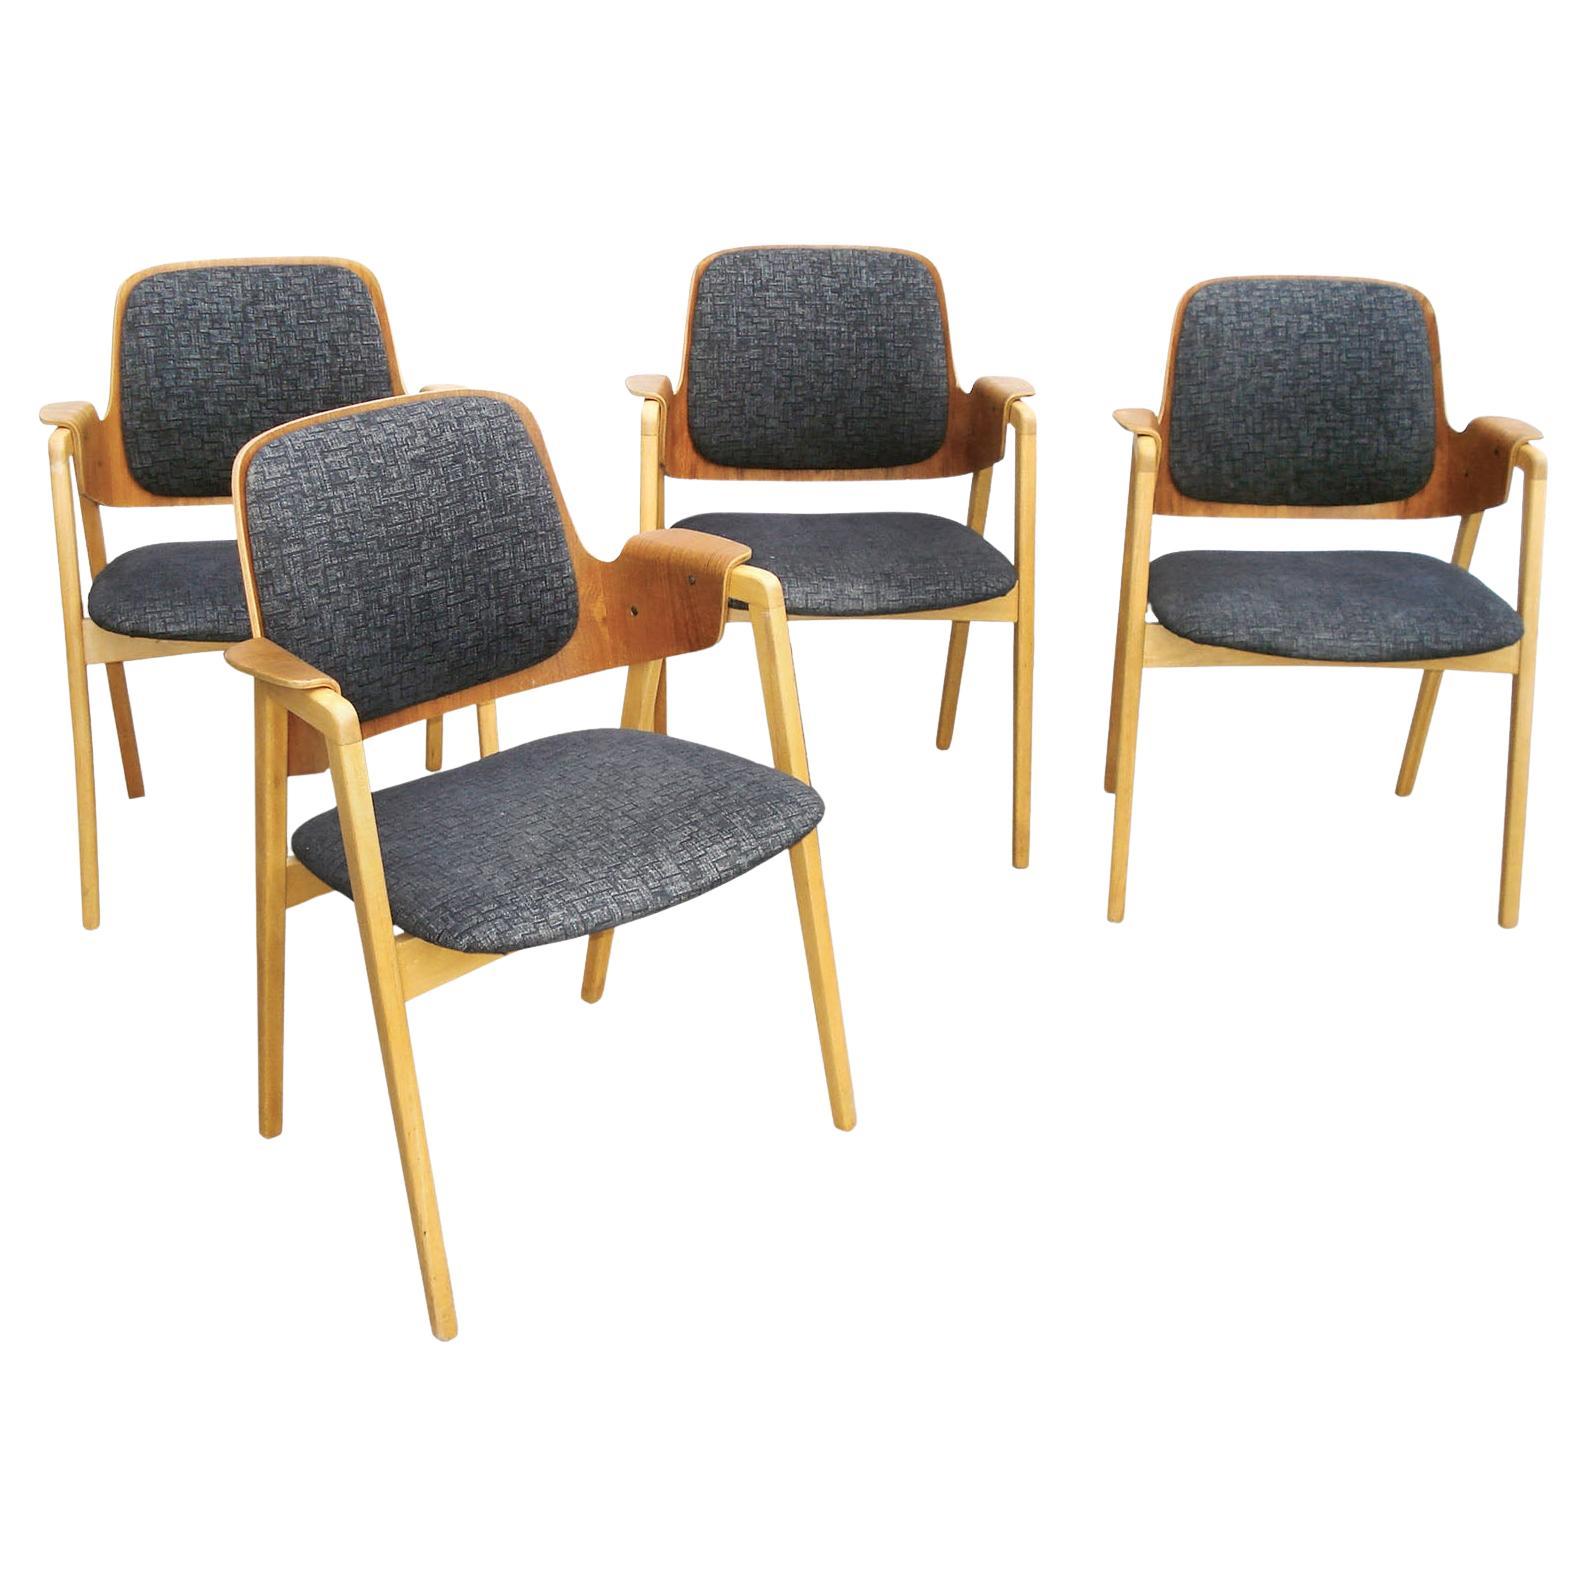 Set of 4 Elias Barup Teak Dining Chairs with Original Upholstery, 1950s Sweden For Sale